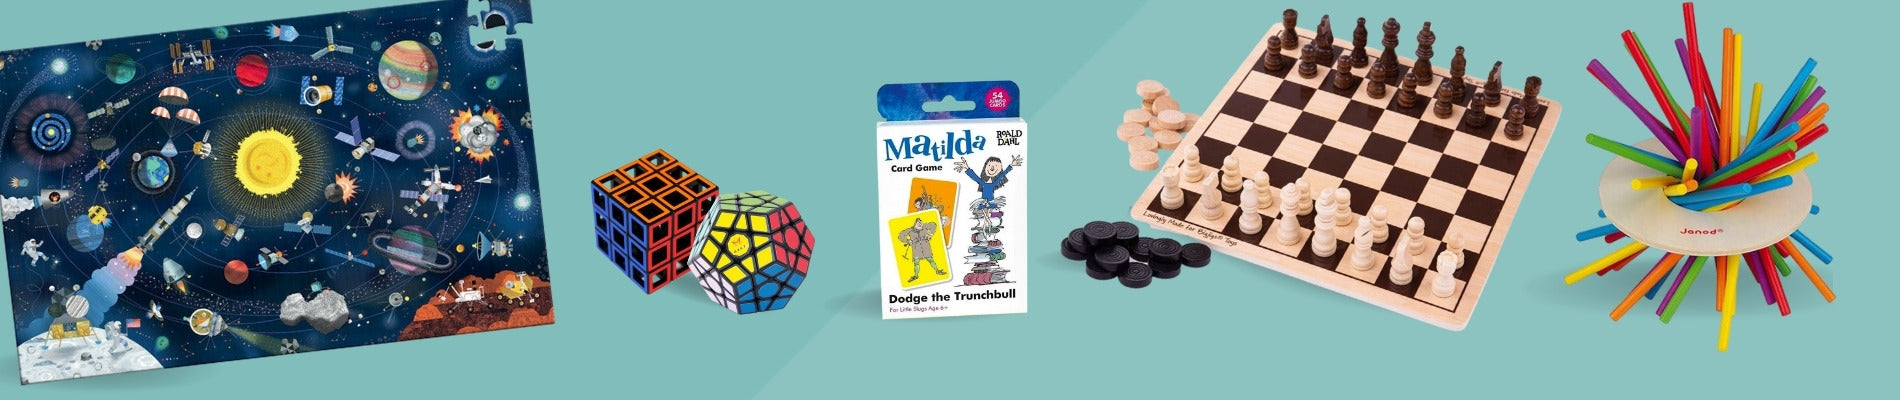 A jigsaw, cube puzzles, a Roald Dhal card game, chess set and crazy sticks game.